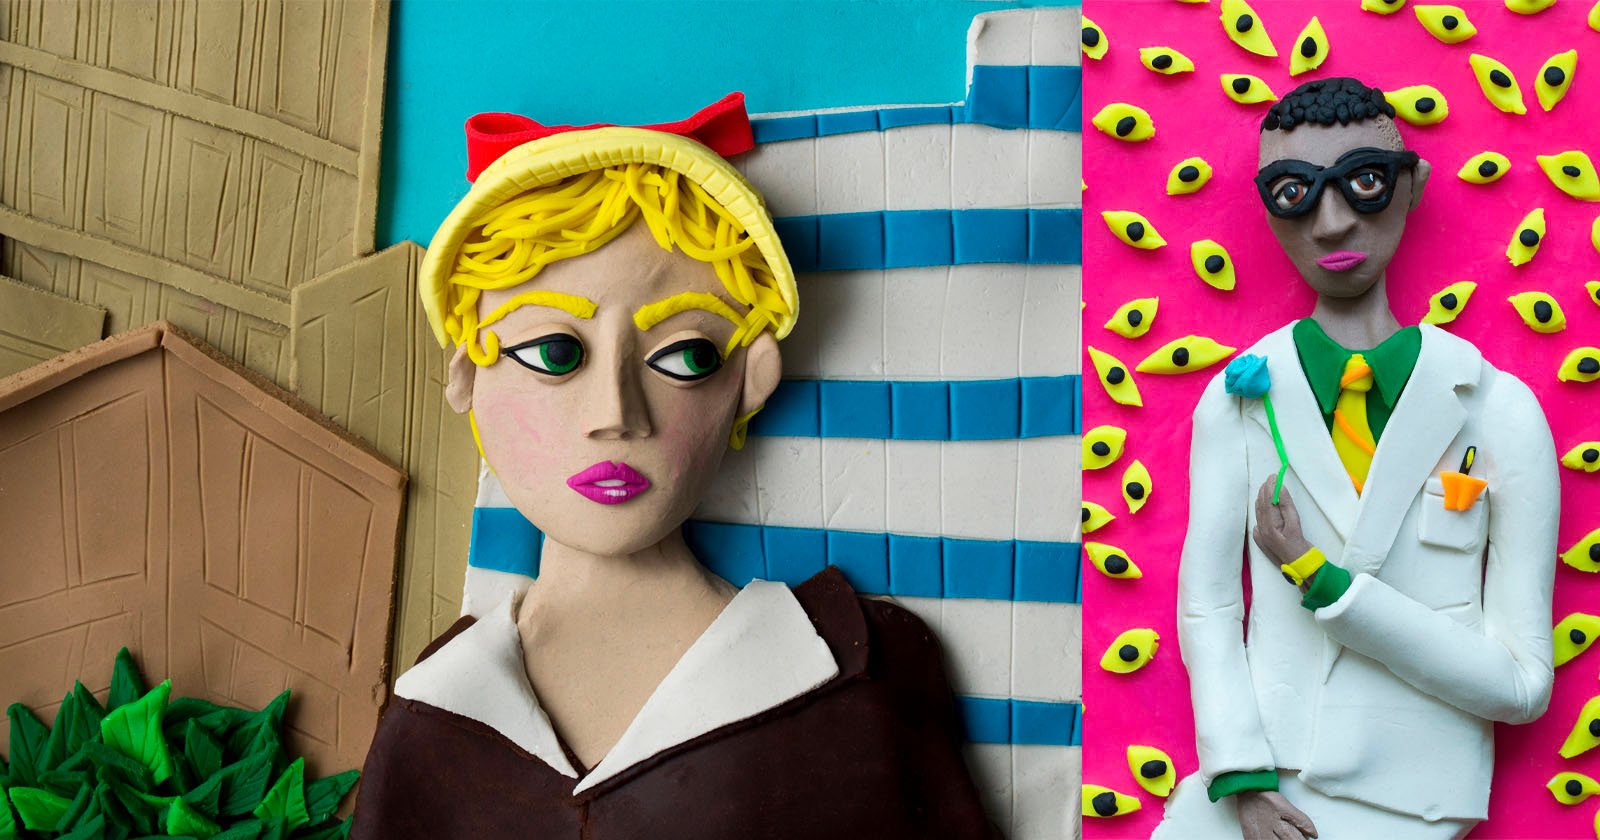 Photos recreated by Play-Doh